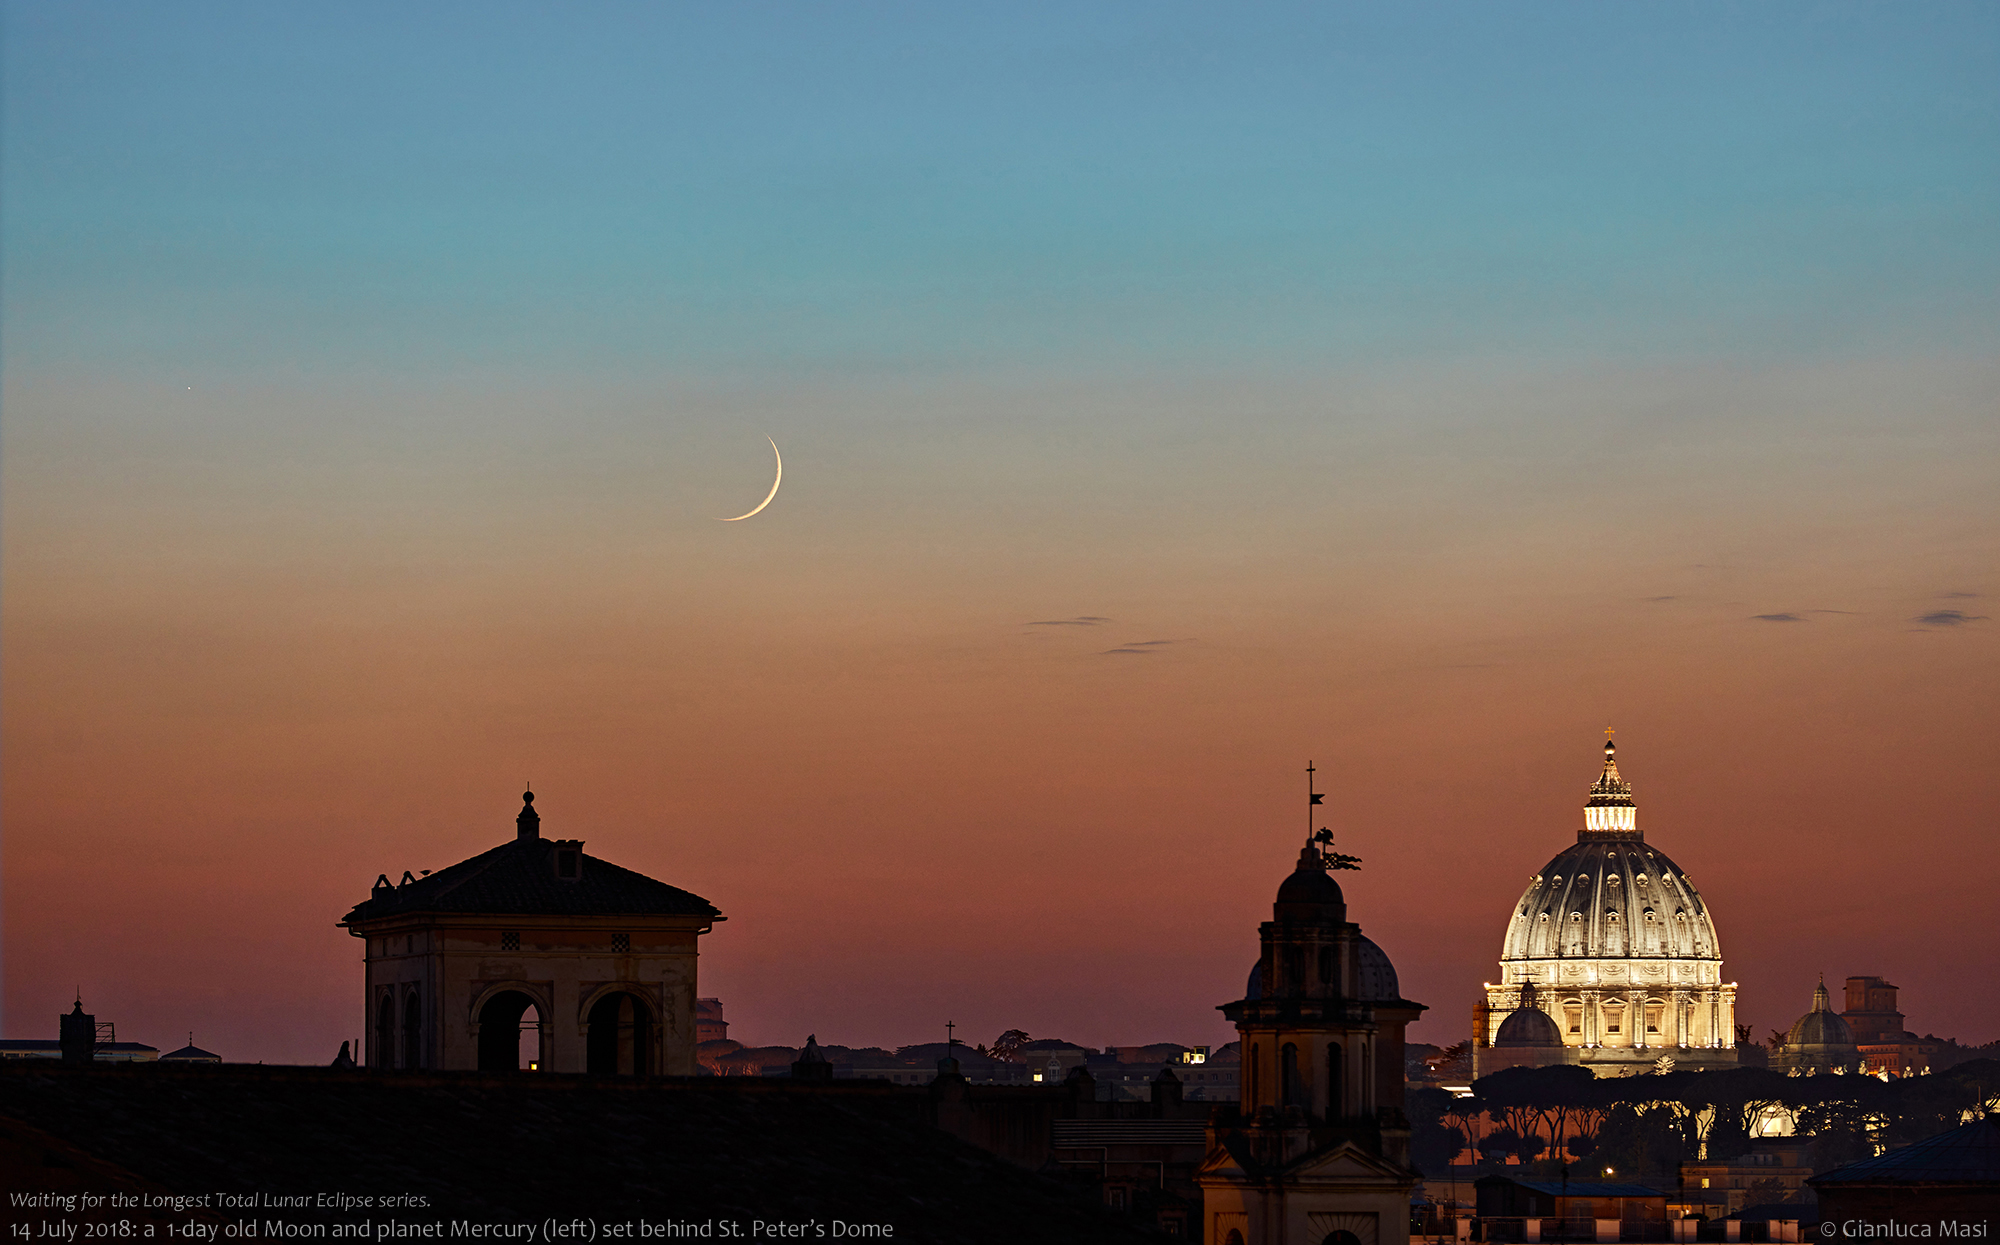 A sharp lunar crescent hangs above St. Peter's Dome, with Mercury on the left - 14 July 2018